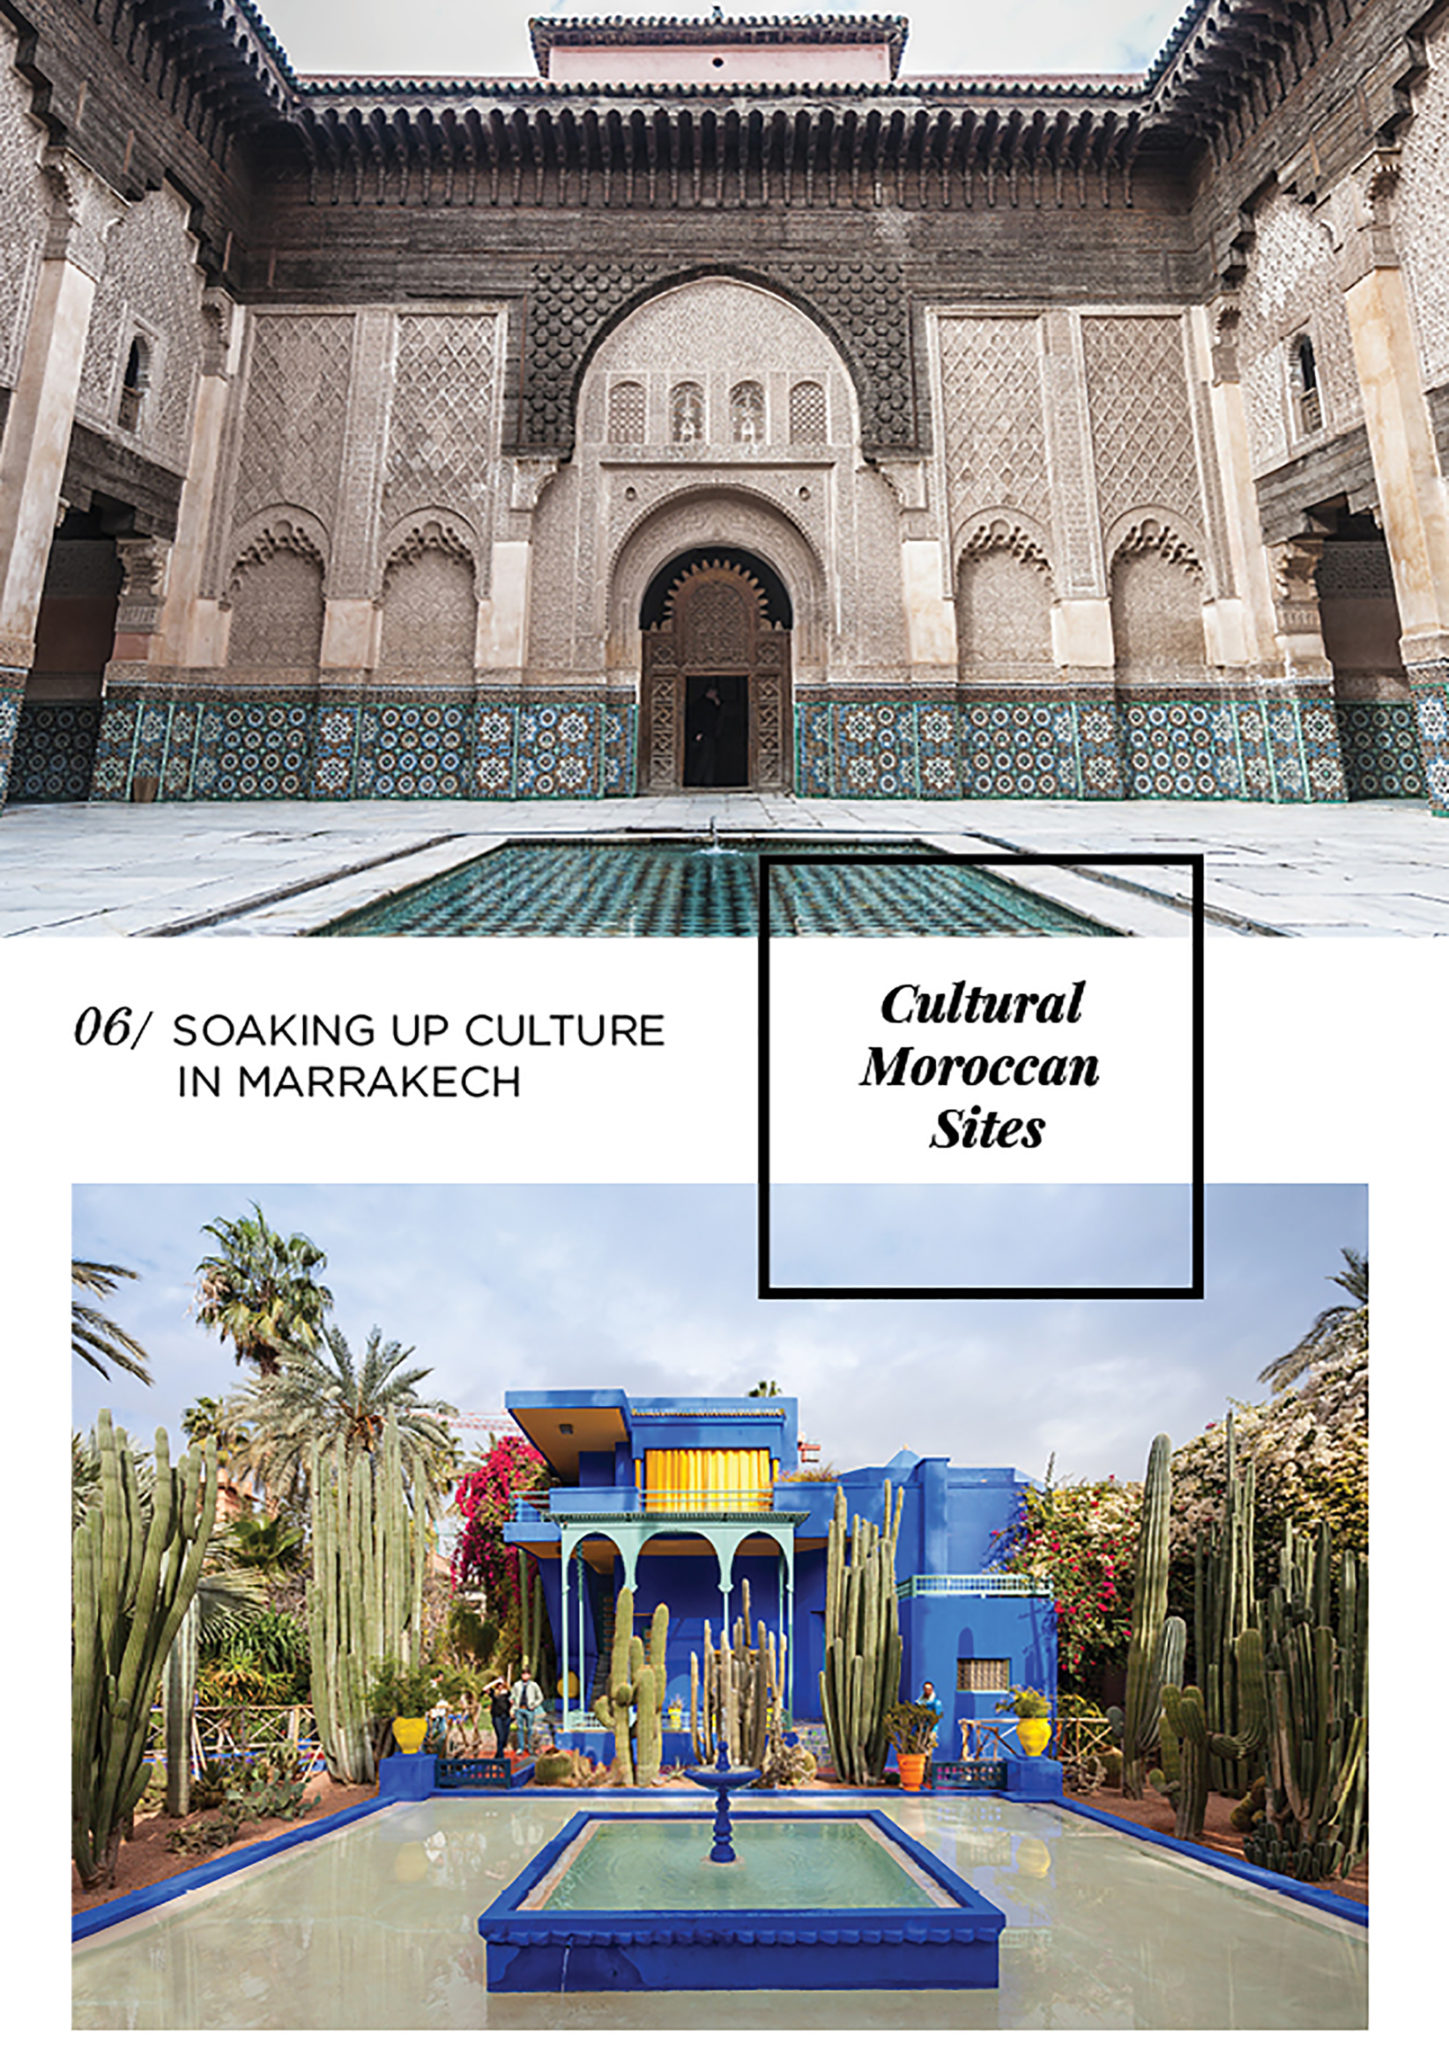 planning a trip to morocco - culture